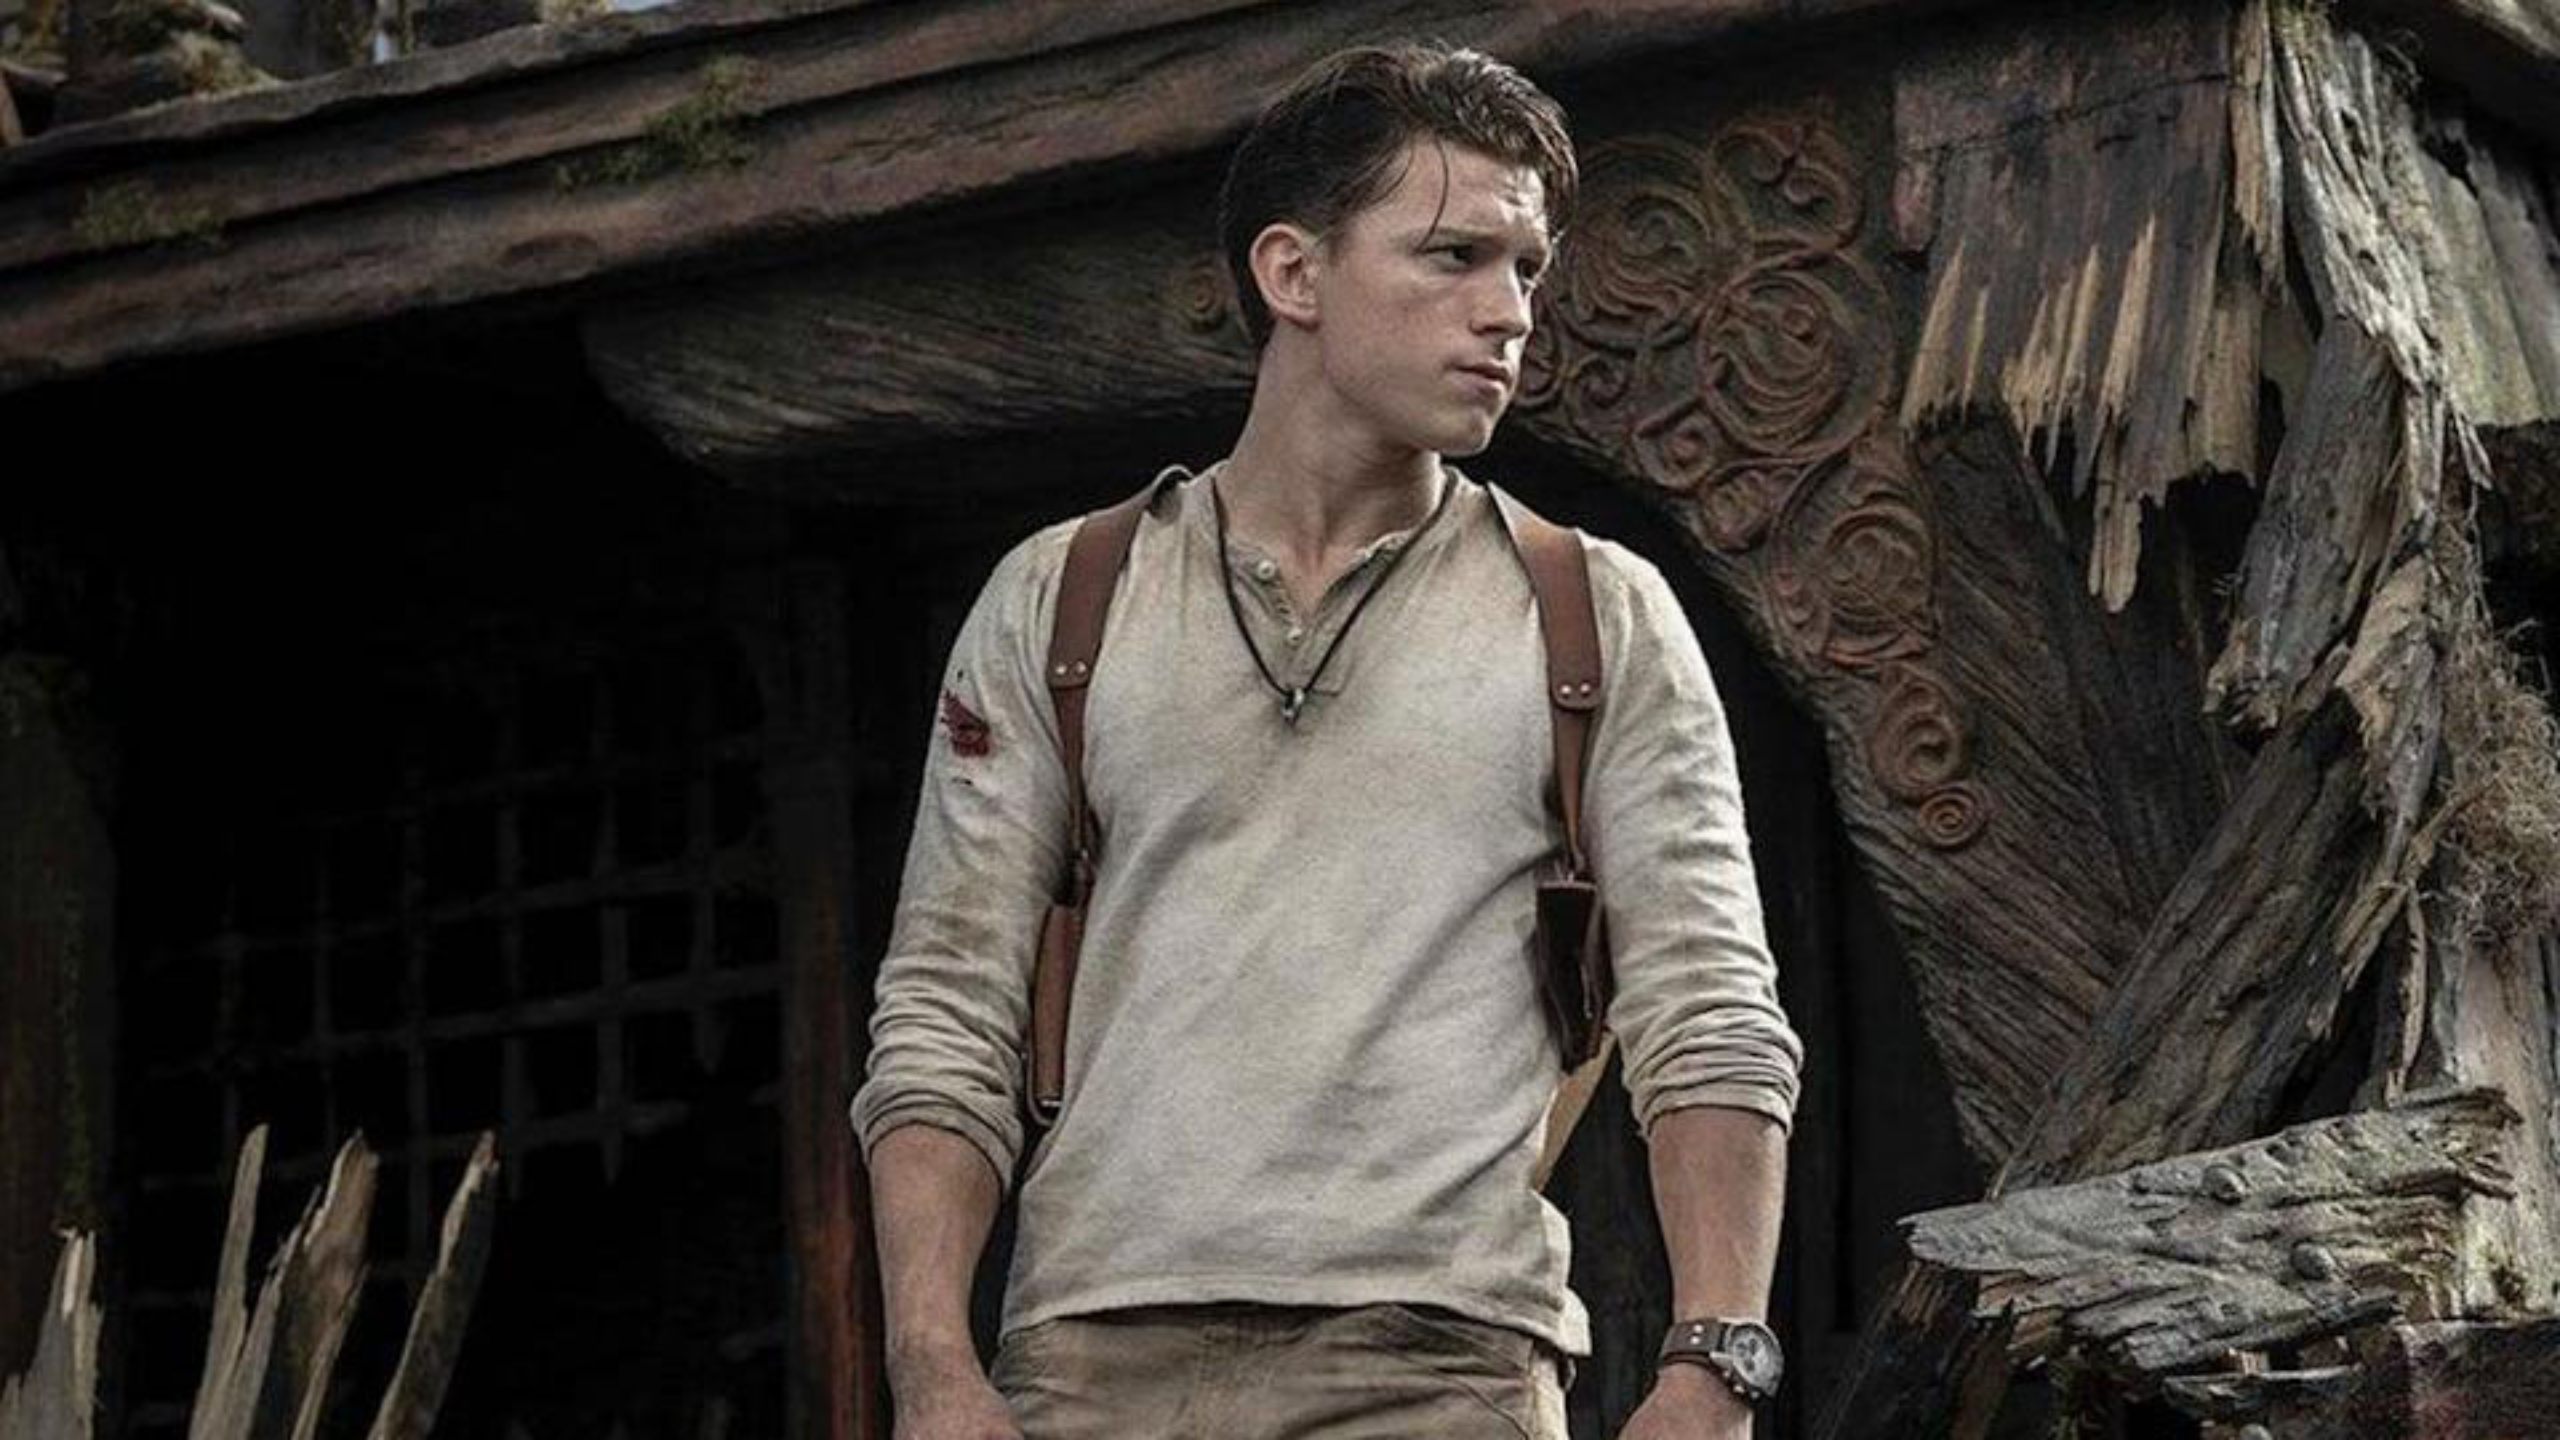 Uncharted, starring Tom Holland, lands on Netflix on July 15th